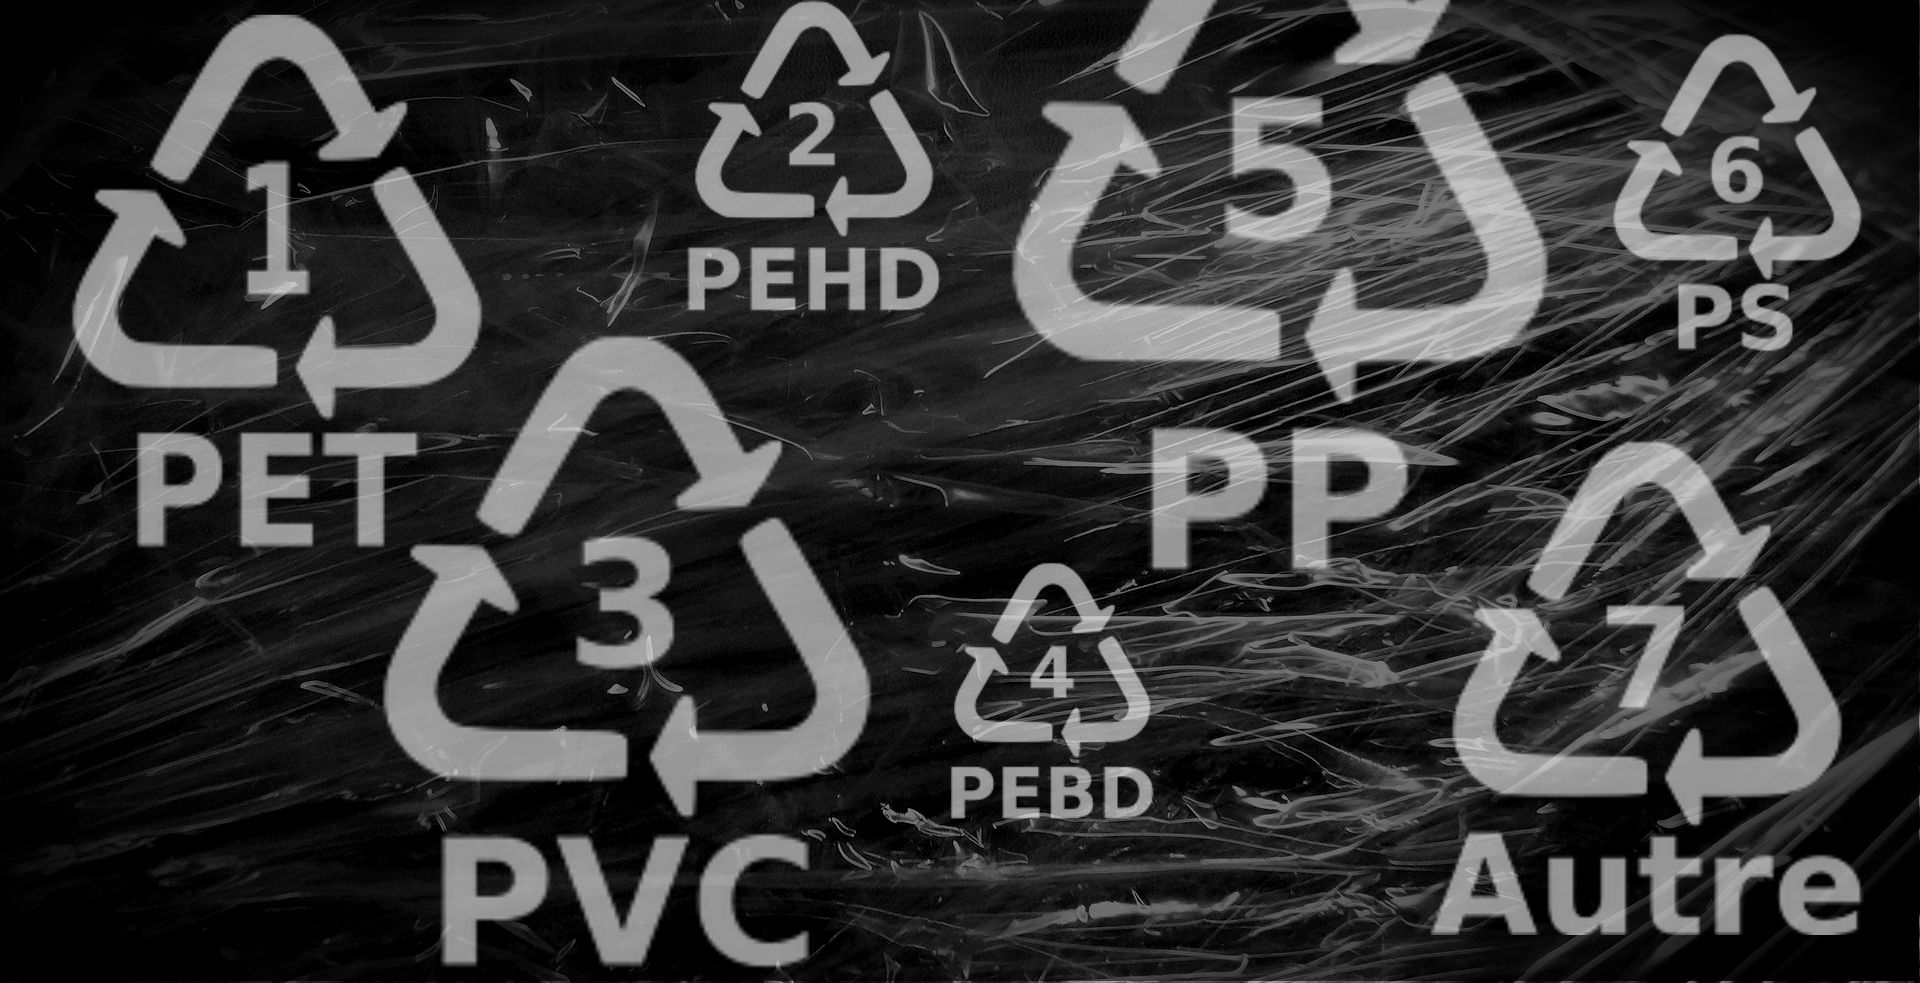 plastic, recycling, recycle, pvc, plastic numbers, recycling numbers, pet, pete, pp, ps